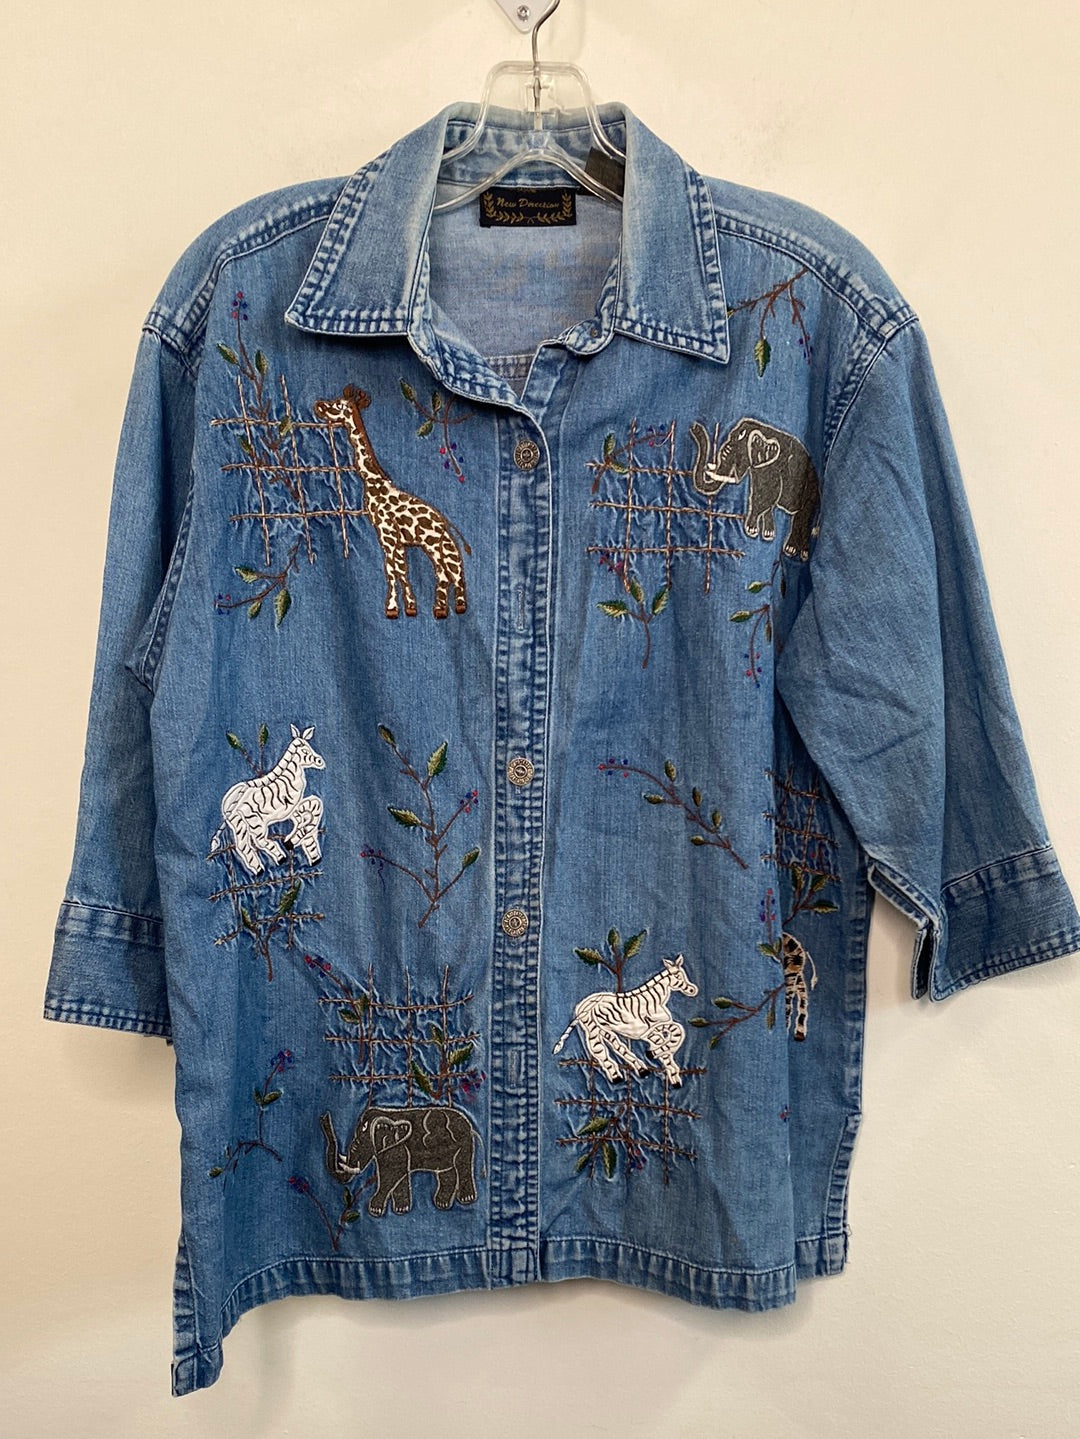 New Direction Embroidered Button Up Denim Shirt (M)